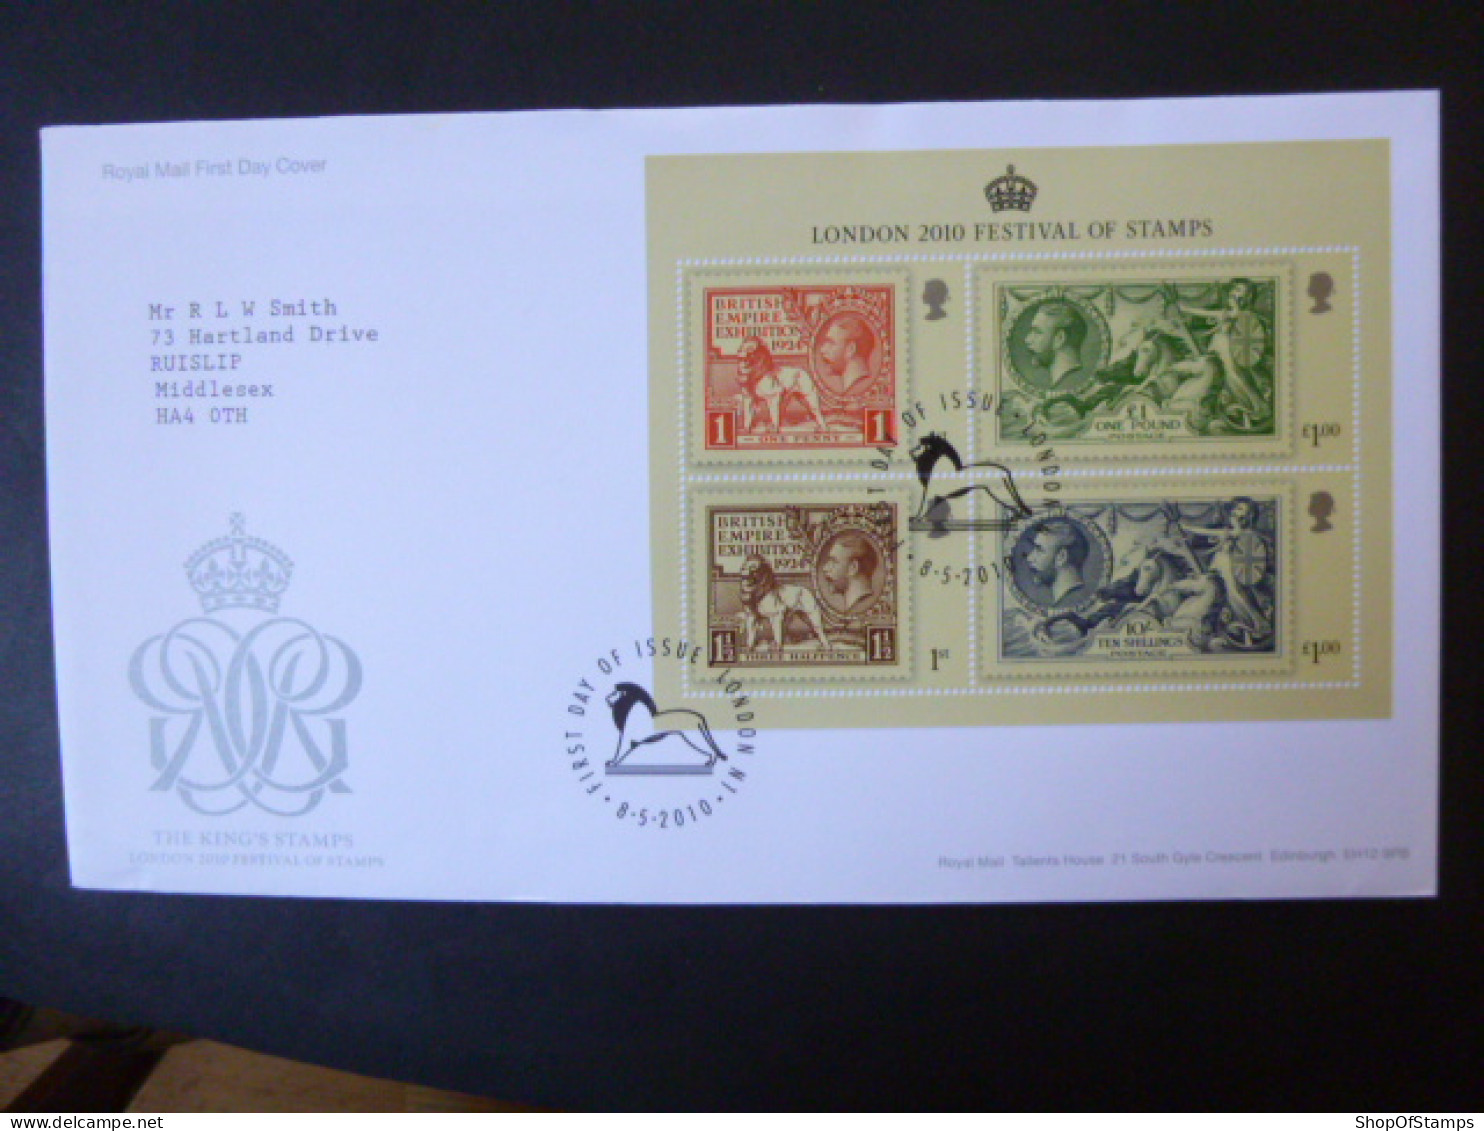 GREAT BRITAIN SG 3072MS LONDON 2010 FESTIVAL OF STAMPS MS FDC LONDON - Unclassified